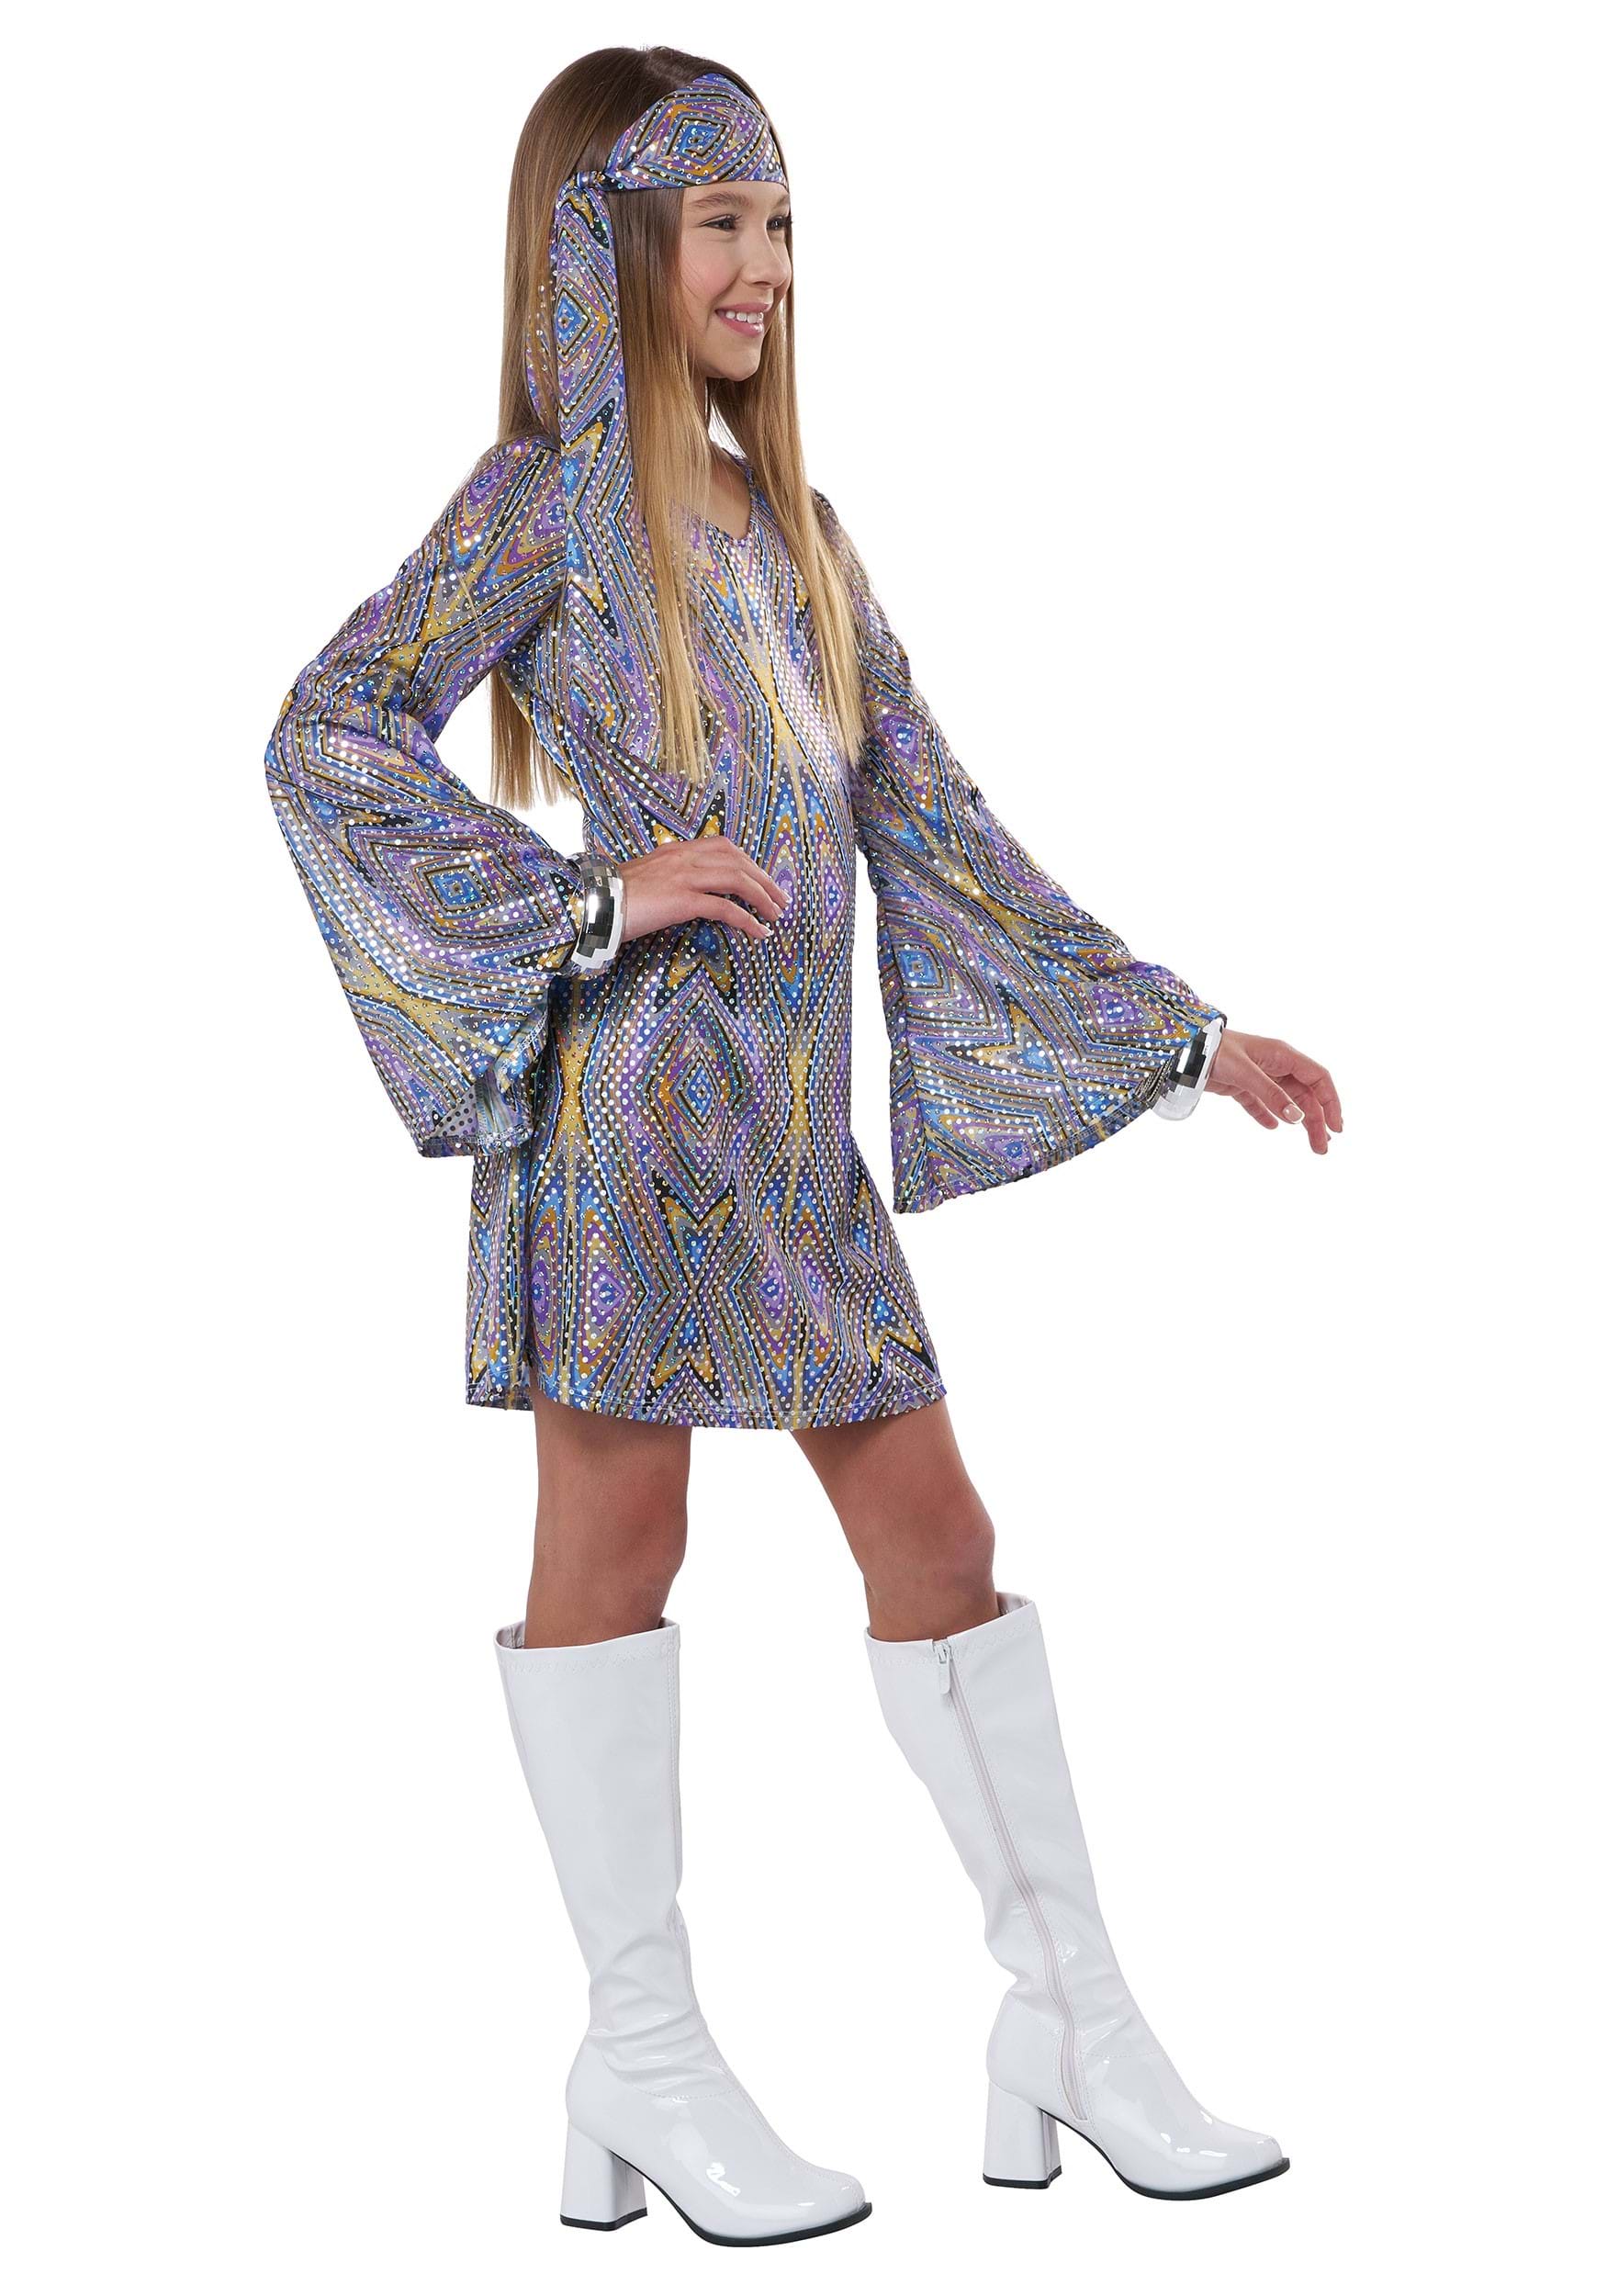 Disco Darling Costume For Girls